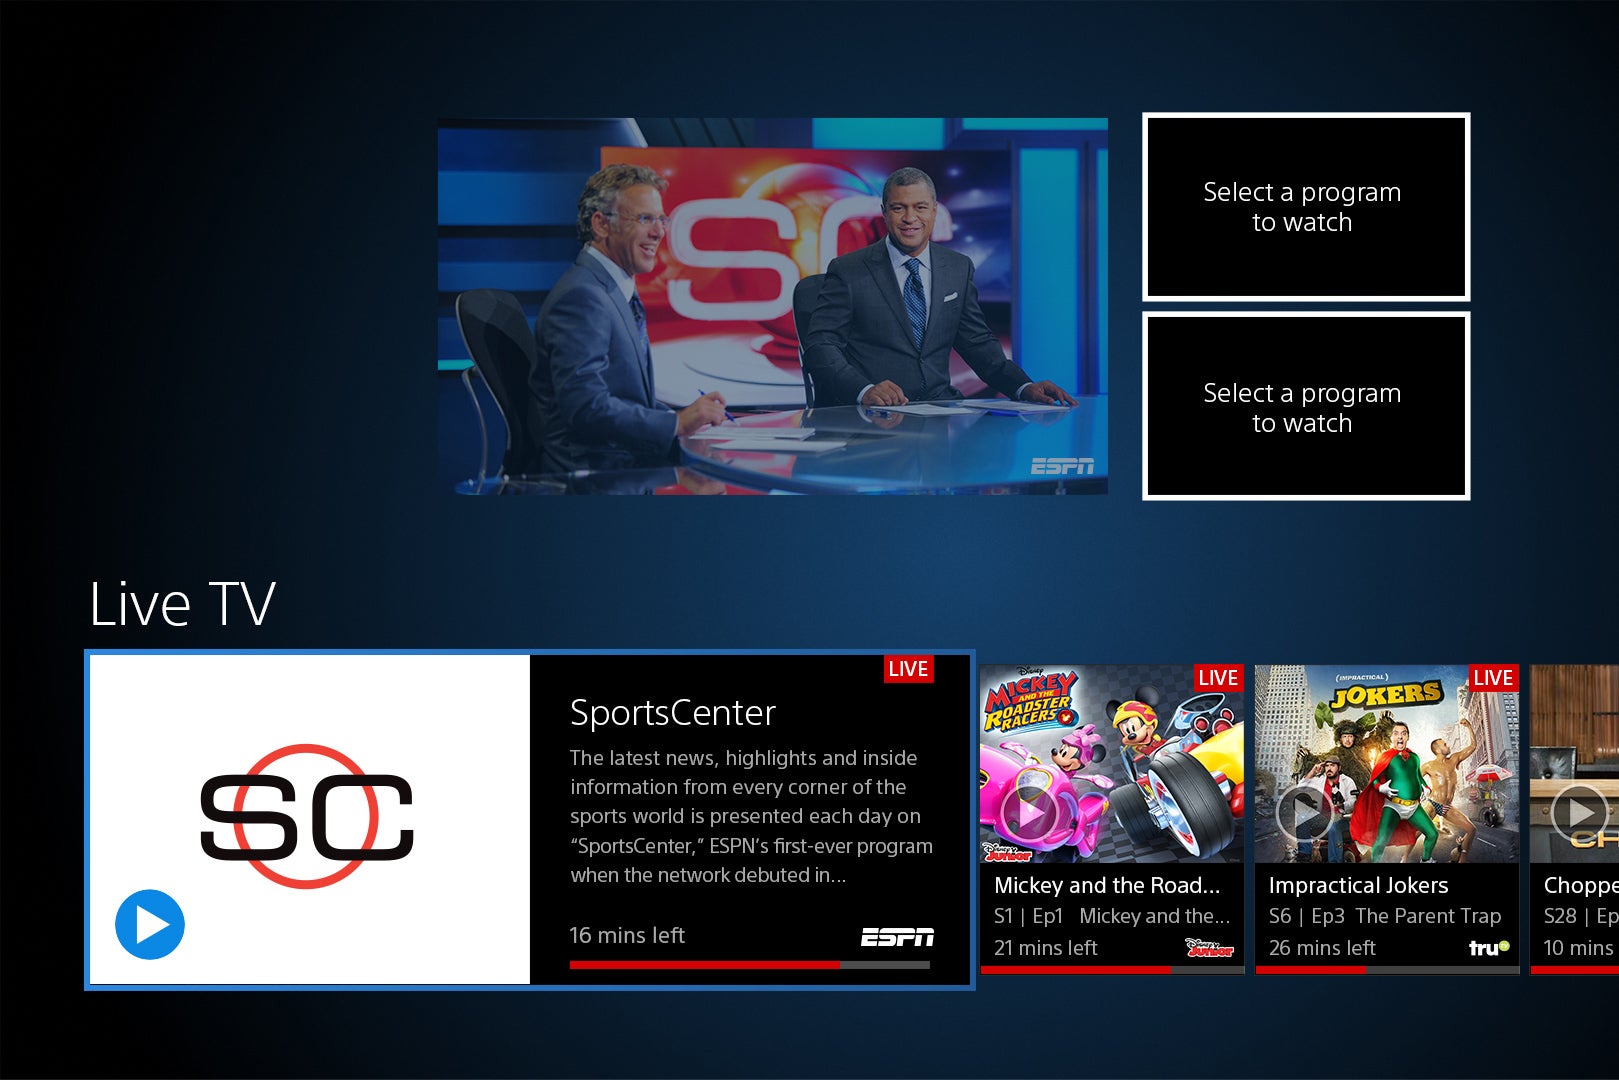 ESPN app for ps4. When is the programme